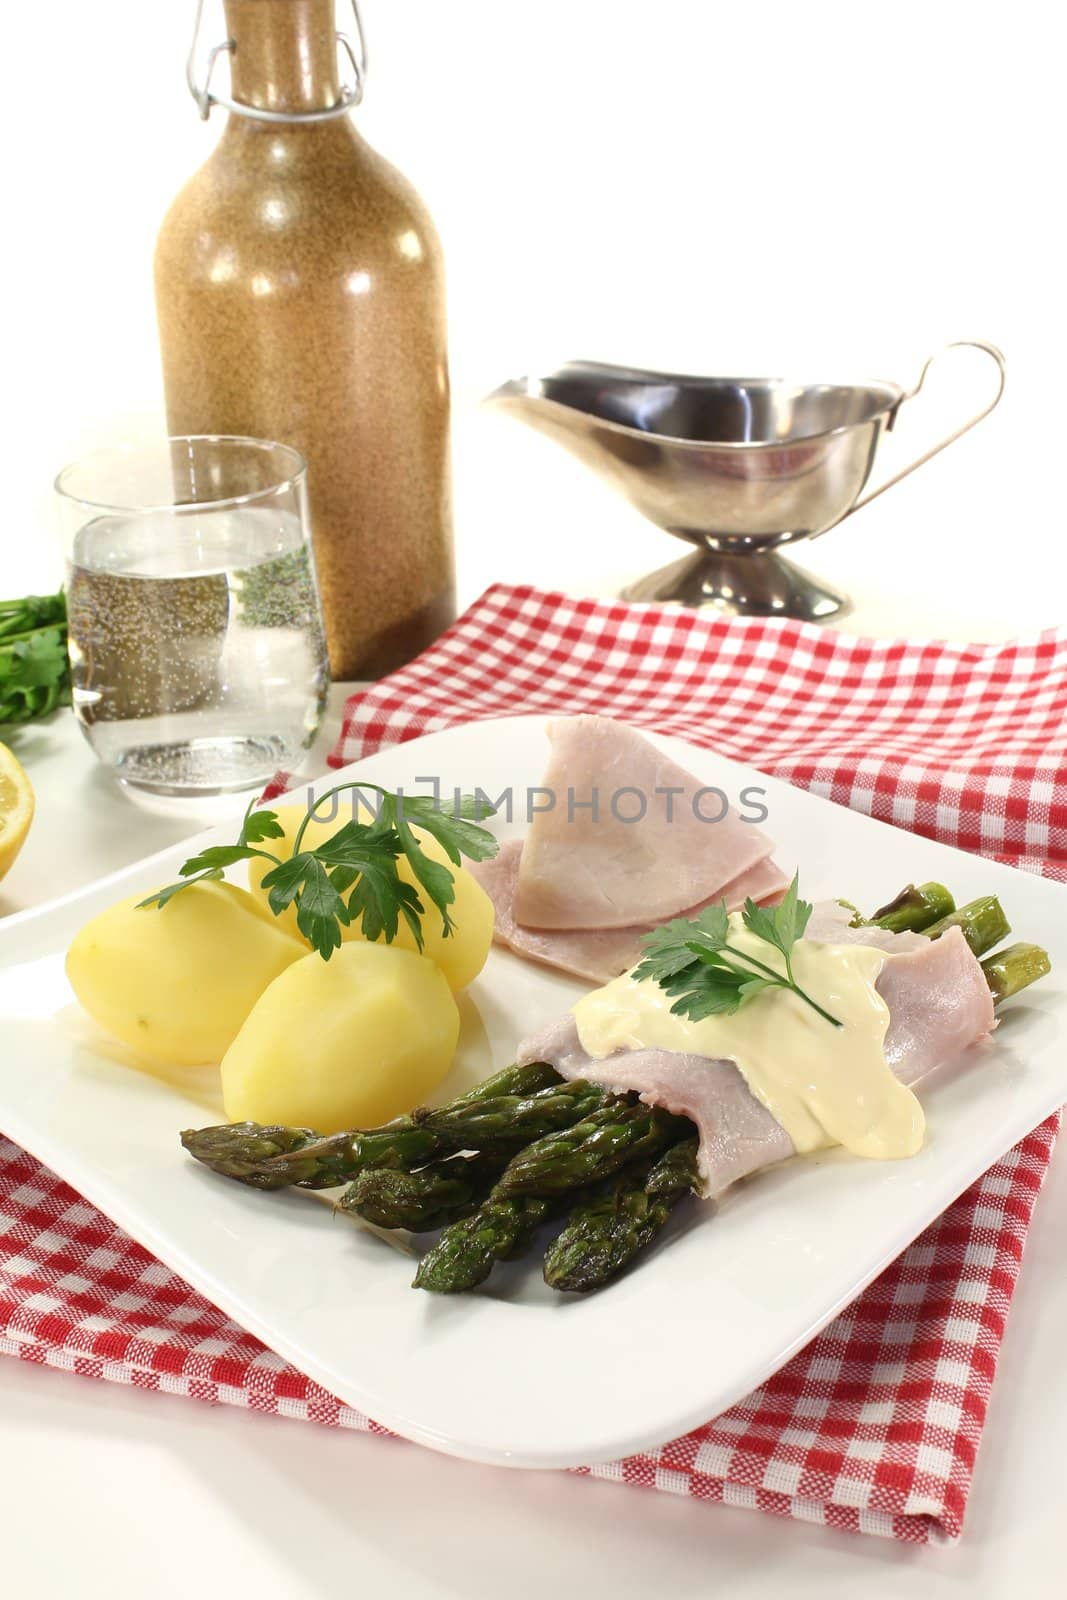 Asparagus with hollandaise sauce, cooked ham, potatoes and parsley on a bright background